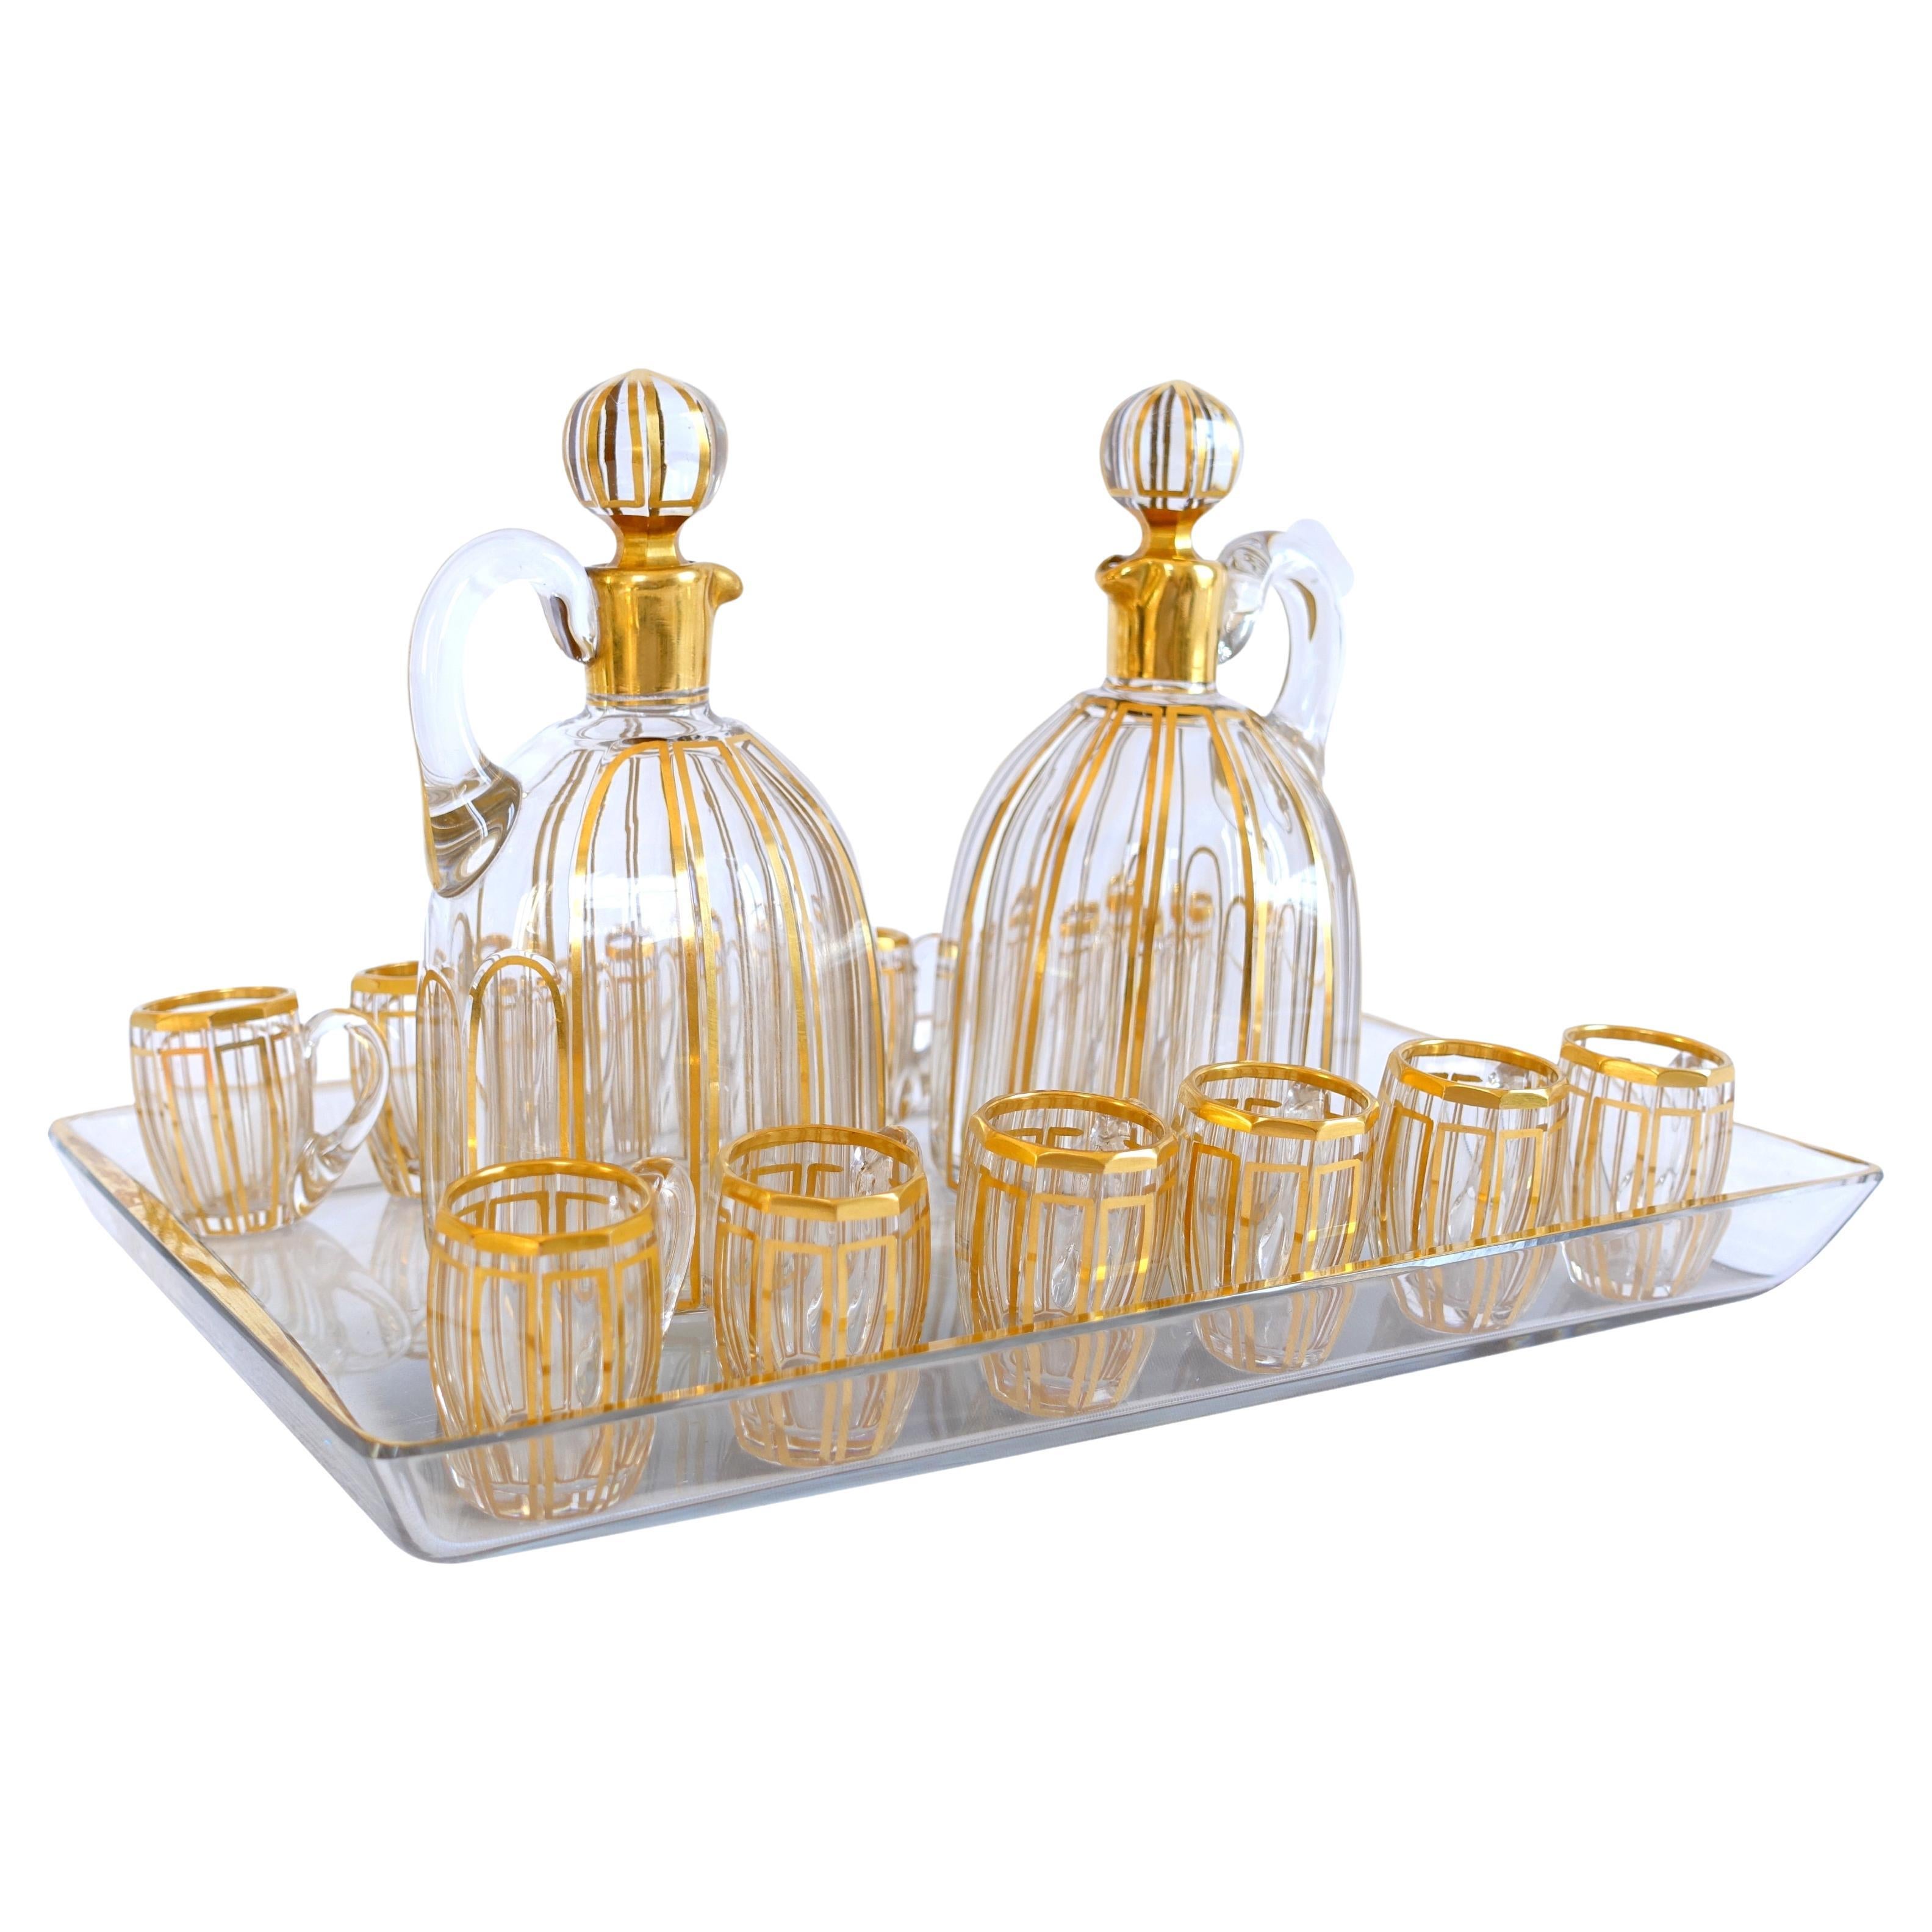 Baccarat crystal liquor set for 12, Cannelures cut pattern enhanced with gold